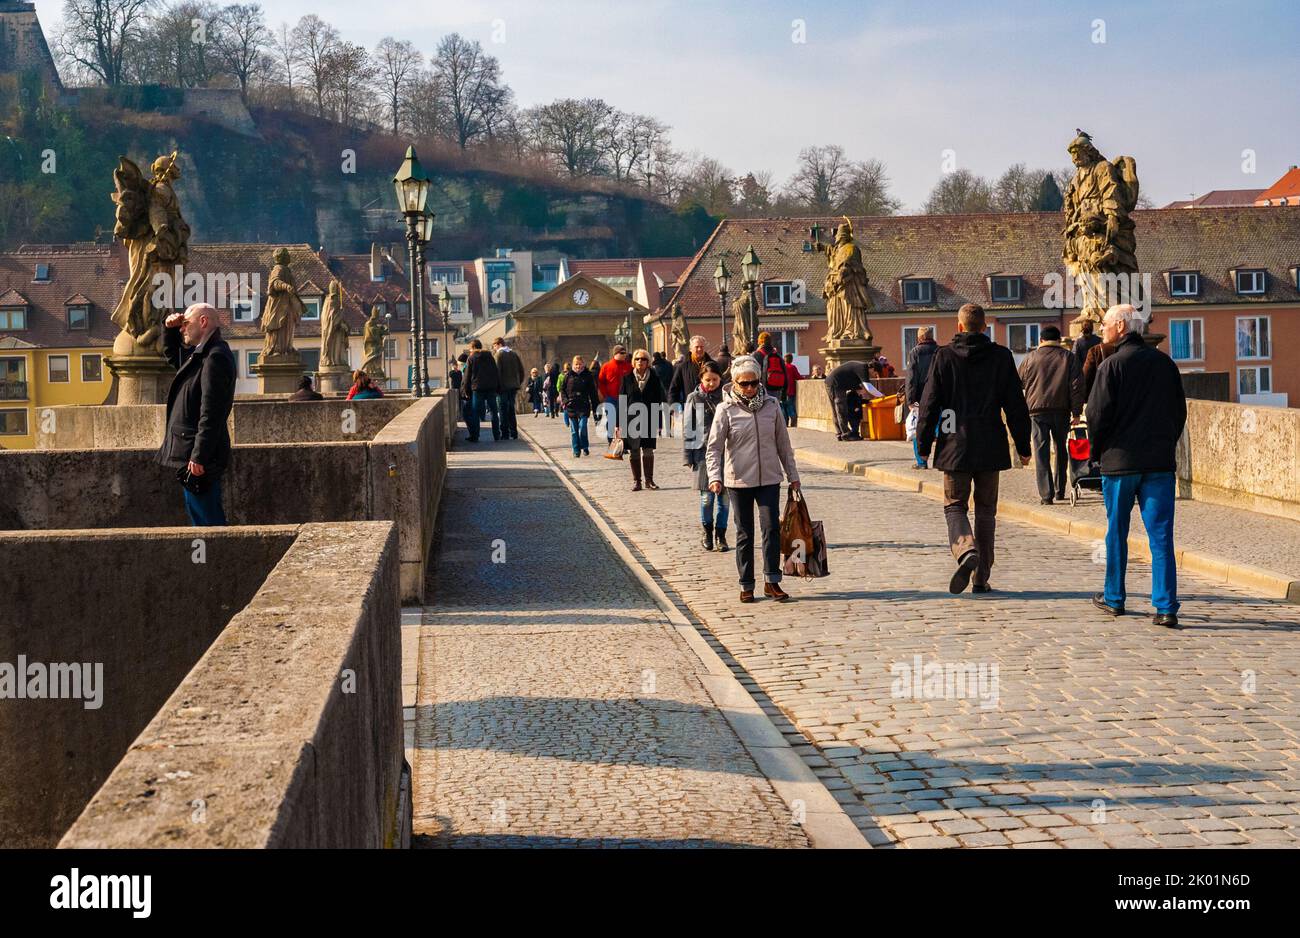 Close-up of people crossing the famous pedestrianized old bridge “Alte Mainbrücke” in Würzburg, Germany. The arch bridge over the Main river has 12... Stock Photo